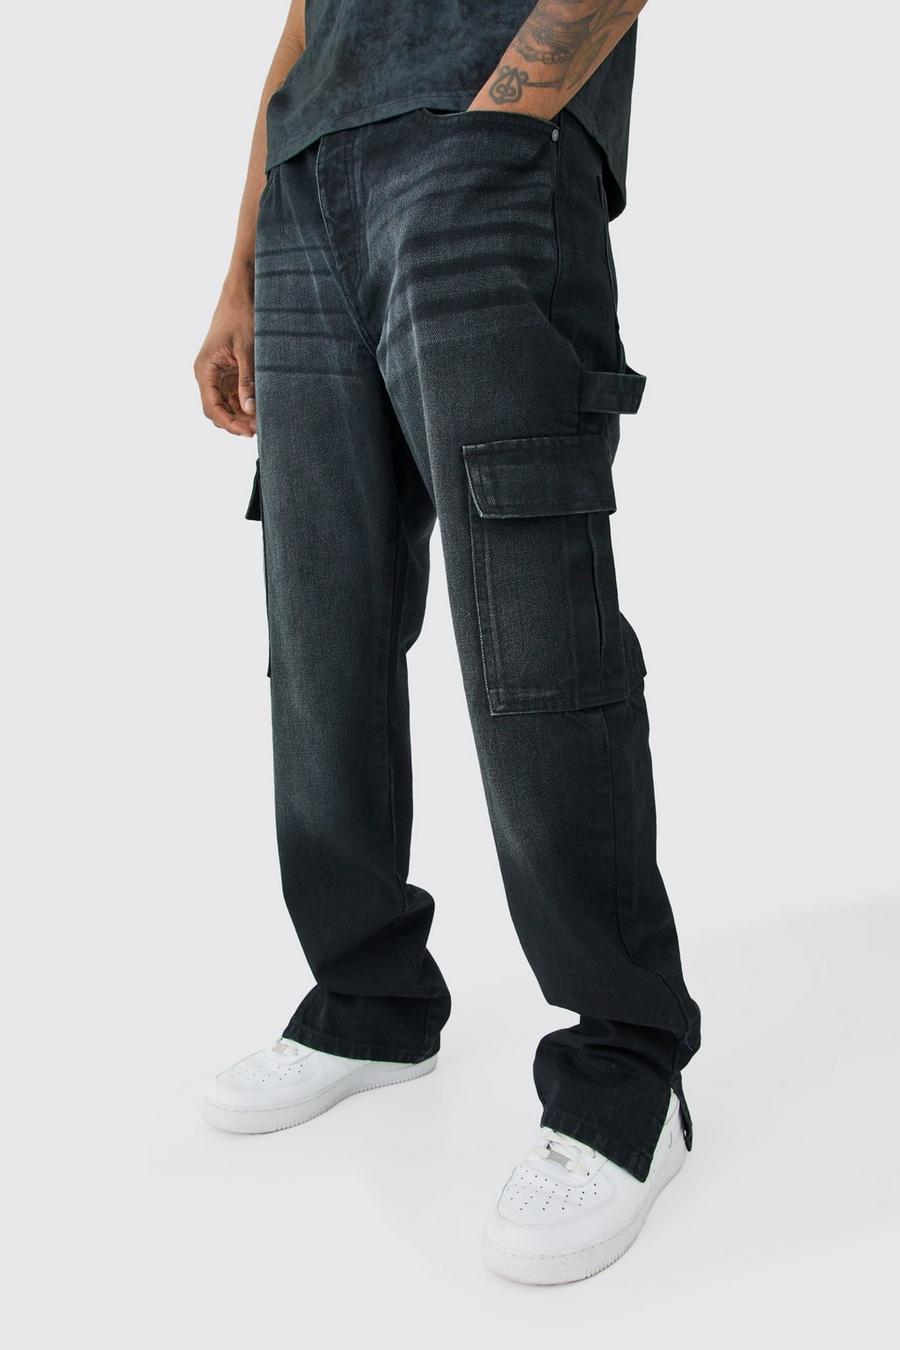 Tall - Jean cargo droit fendu, Washed black image number 1